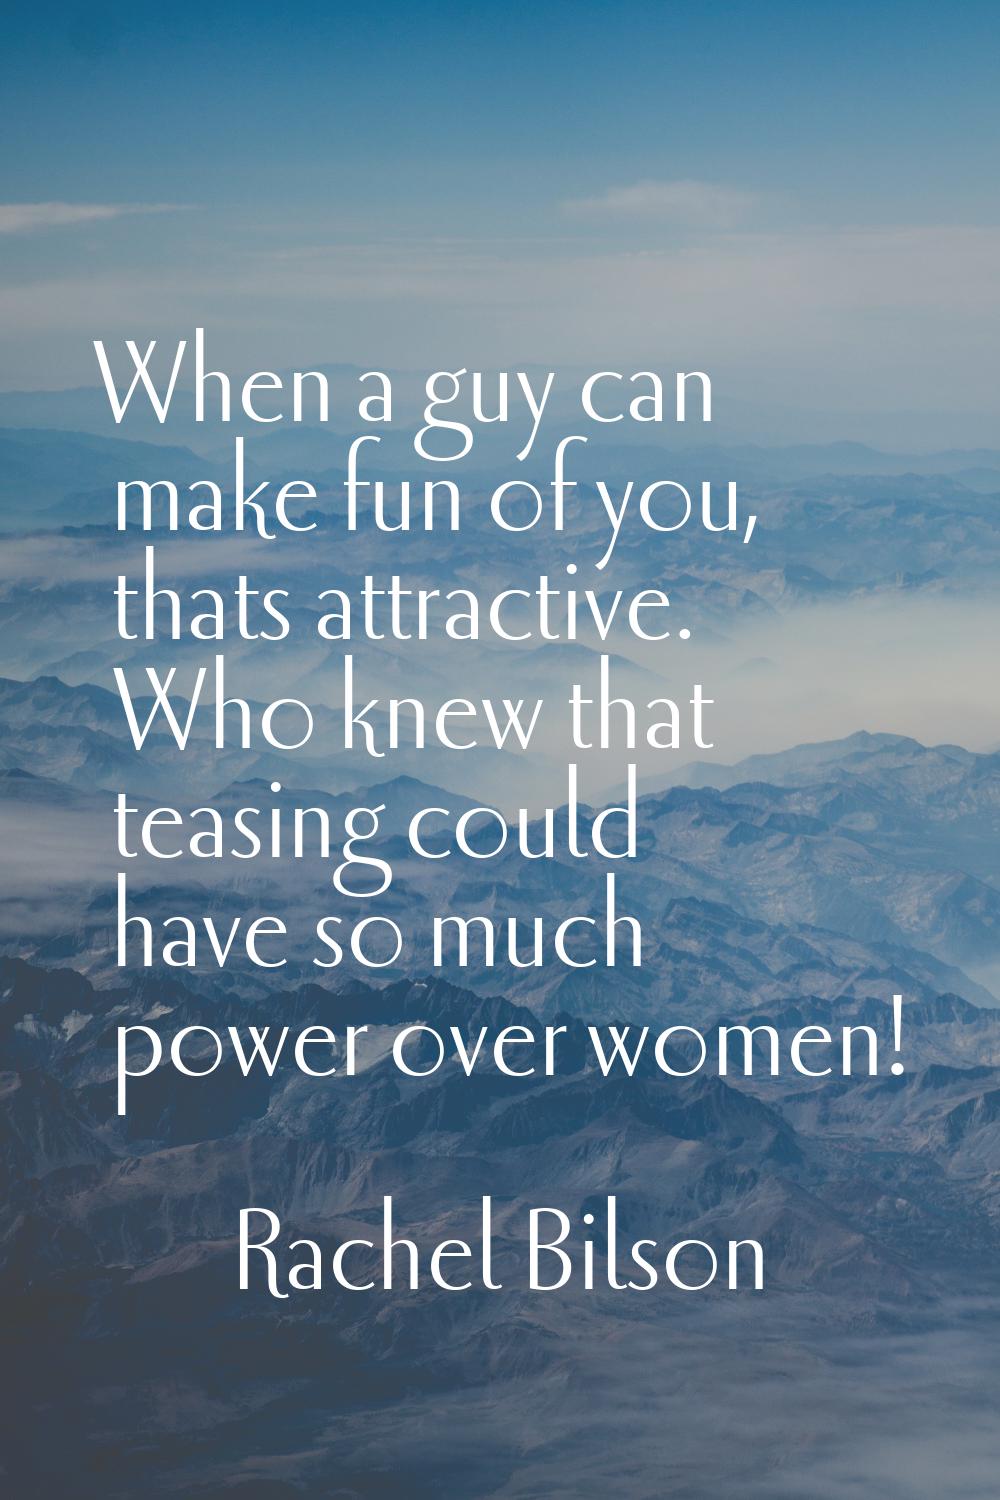 When a guy can make fun of you, thats attractive. Who knew that teasing could have so much power ov